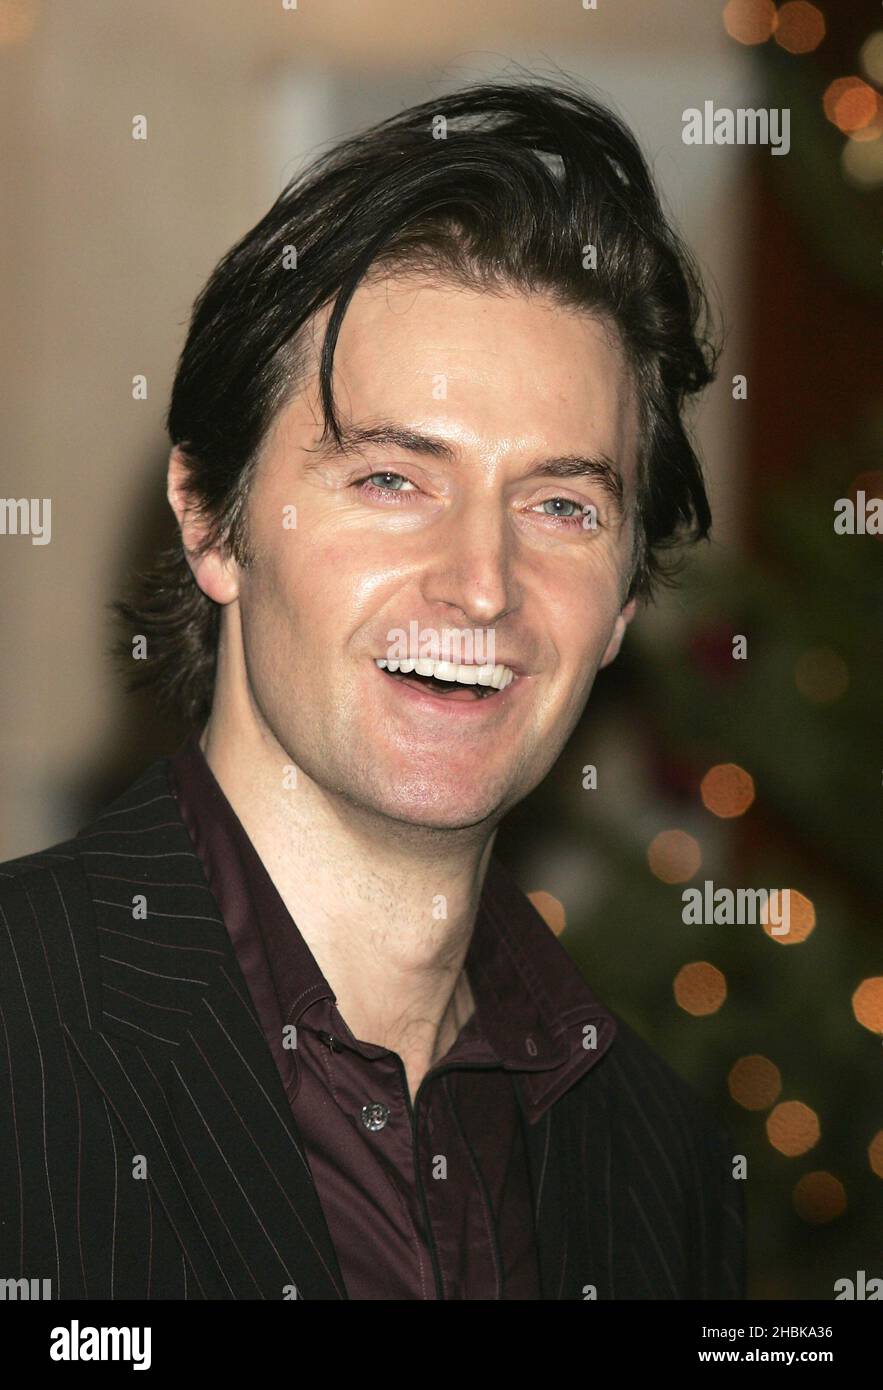 Richard Armitage arrives at the Women in Film and Television Awards at The Hilton Hotel in central London. Stock Photo